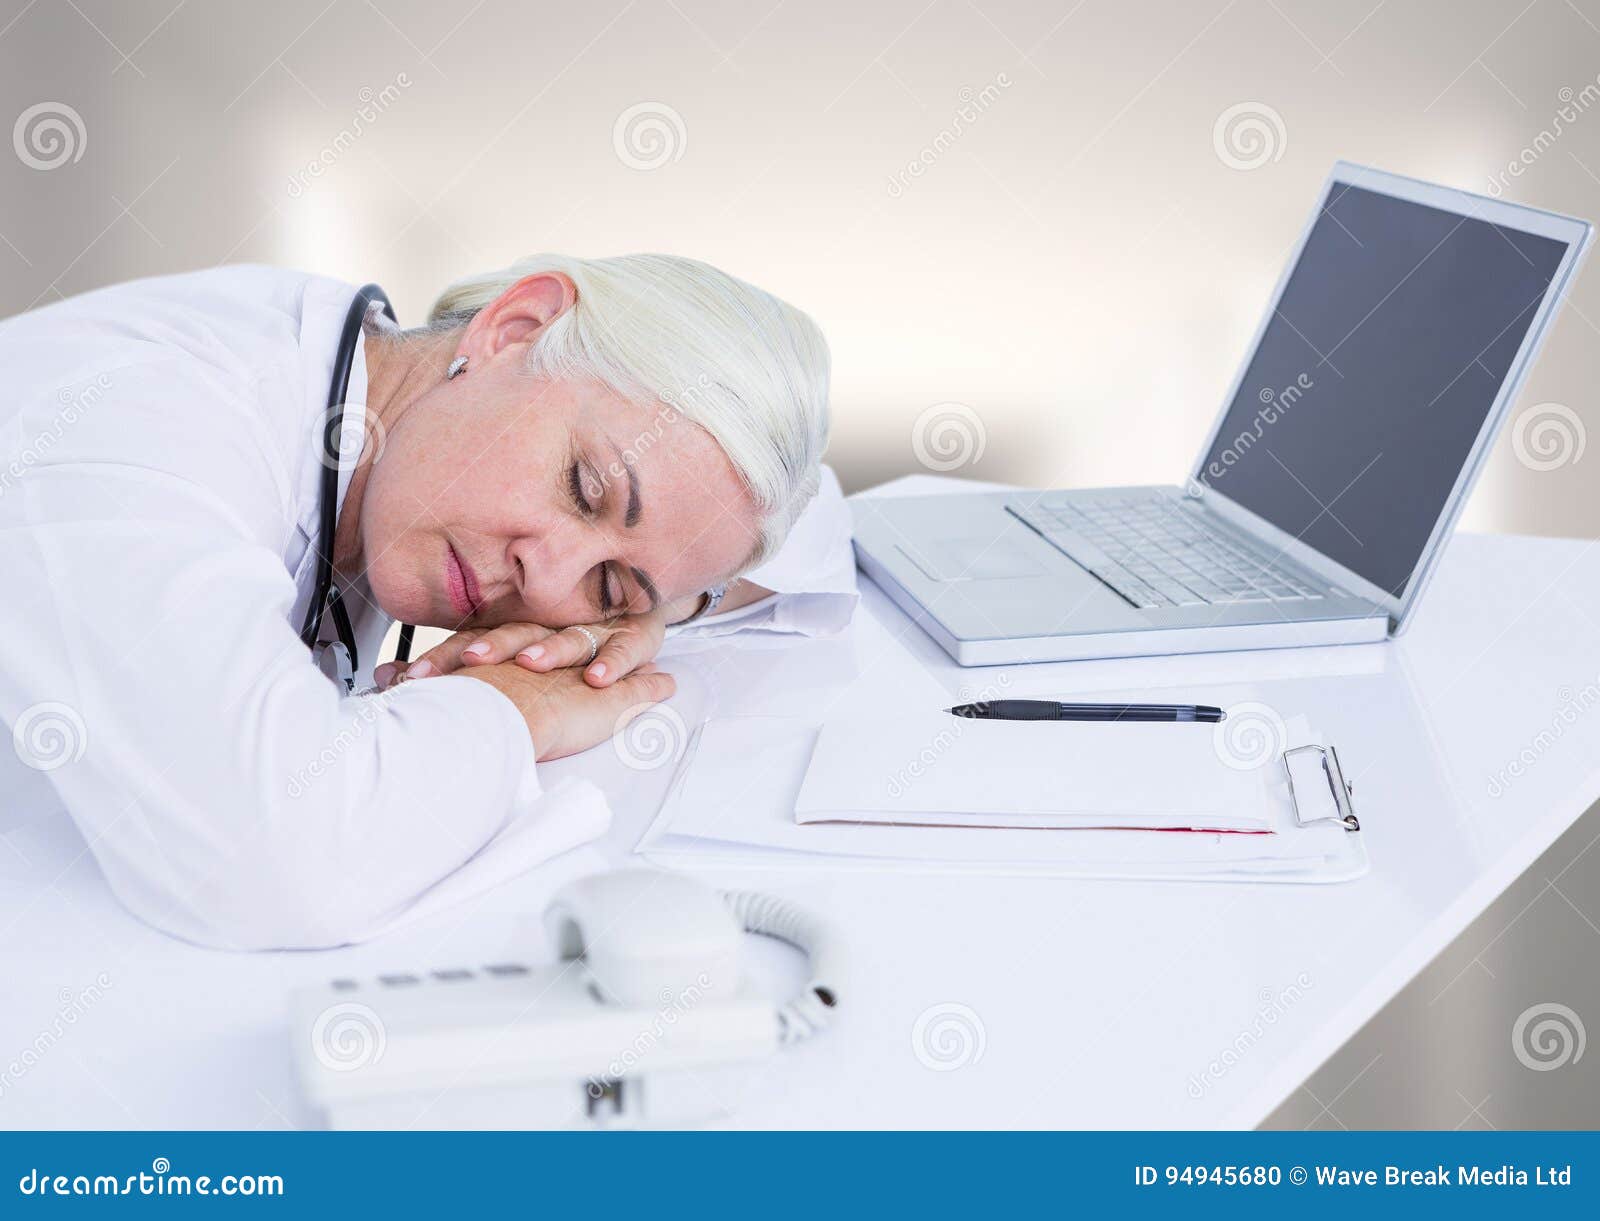 Doctor Asleep At Desk Against White Blurred Hallway Stock Photo